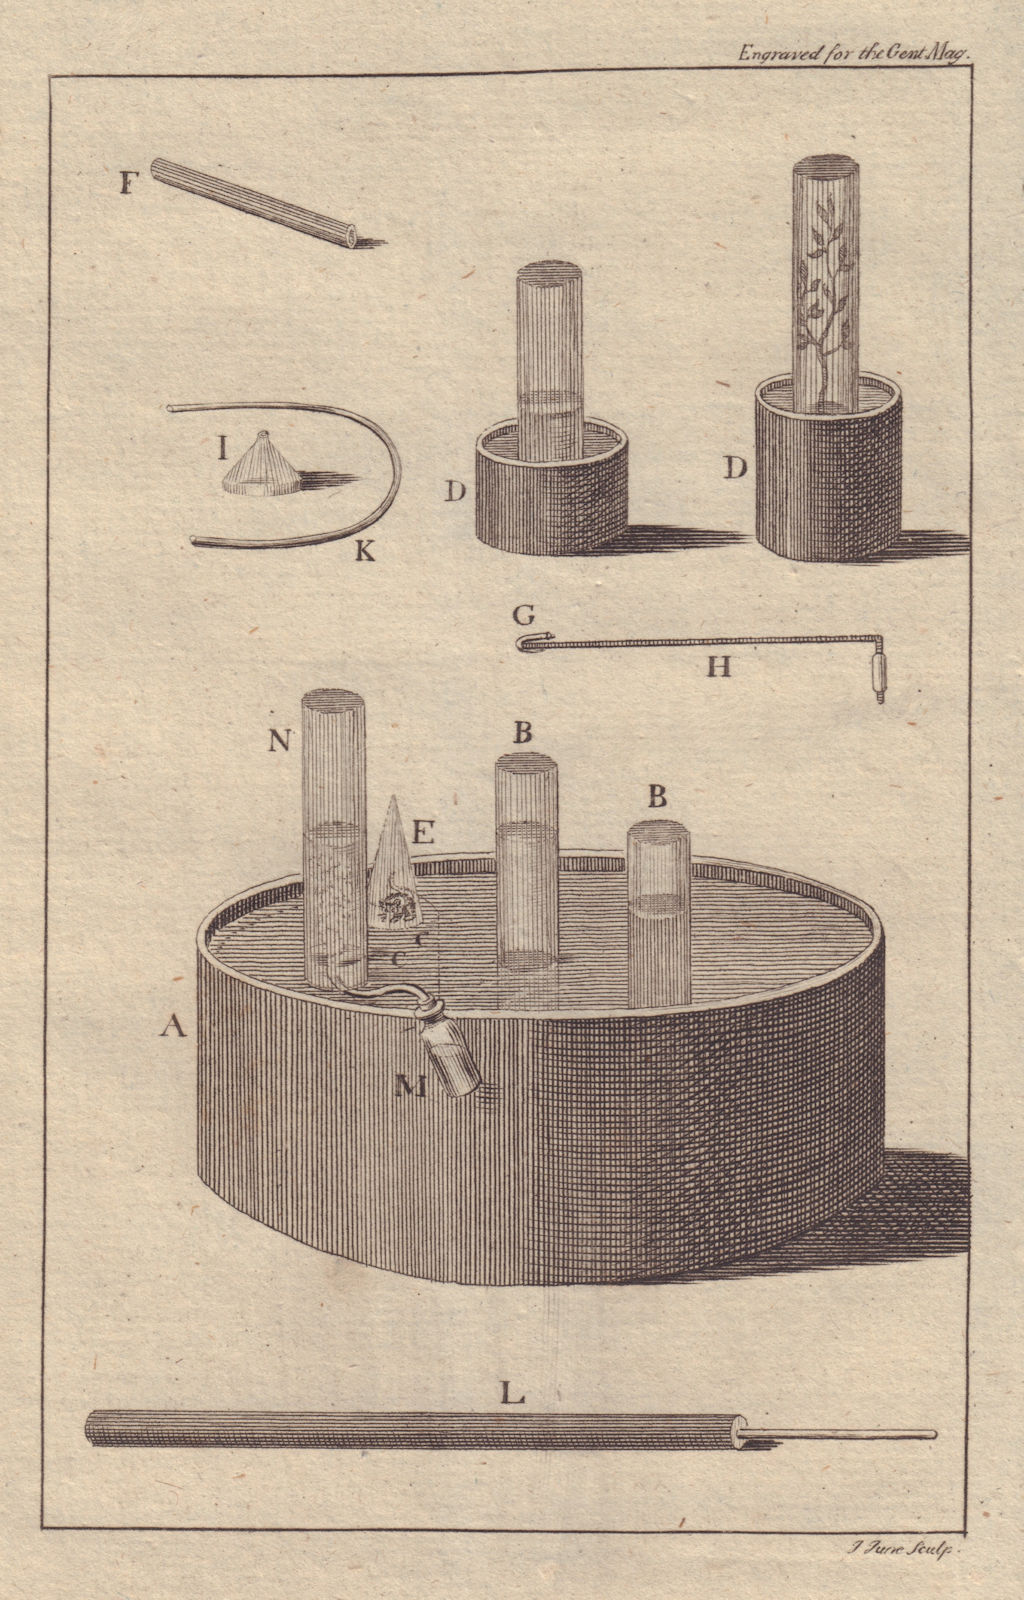 Simple Apparatus for making experiments on air. Science. GENTS MAG 1773 print